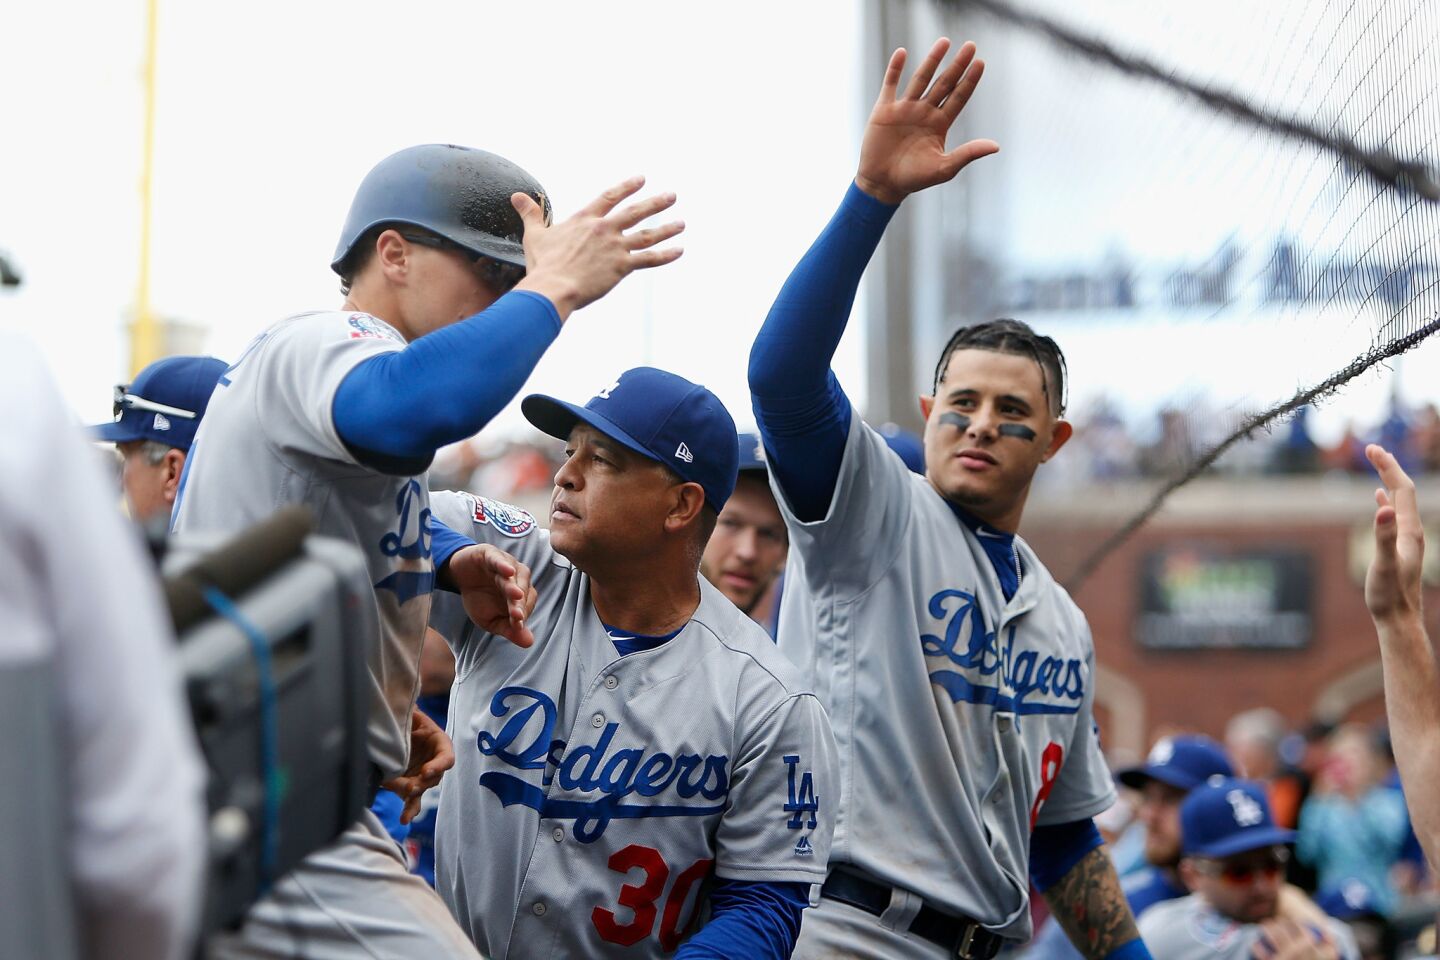 SAN FRANCISCO, CA - SEPTEMBER 29: Enrique Hernandez #14 of the Los Angeles Dodgers is congratulated by manager Dave Roberts #30 and teammate Manny Machado #8 after scoring on single hit by Chris Taylor #3 of the Los Angeles Dodgers during the ninth inning against the San Francisco Giants at AT&T Park on September 29, 2018 in San Francisco, California. (Photo by Lachlan Cunningham/Getty Images) ** OUTS - ELSENT, FPG, CM - OUTS * NM, PH, VA if sourced by CT, LA or MoD **